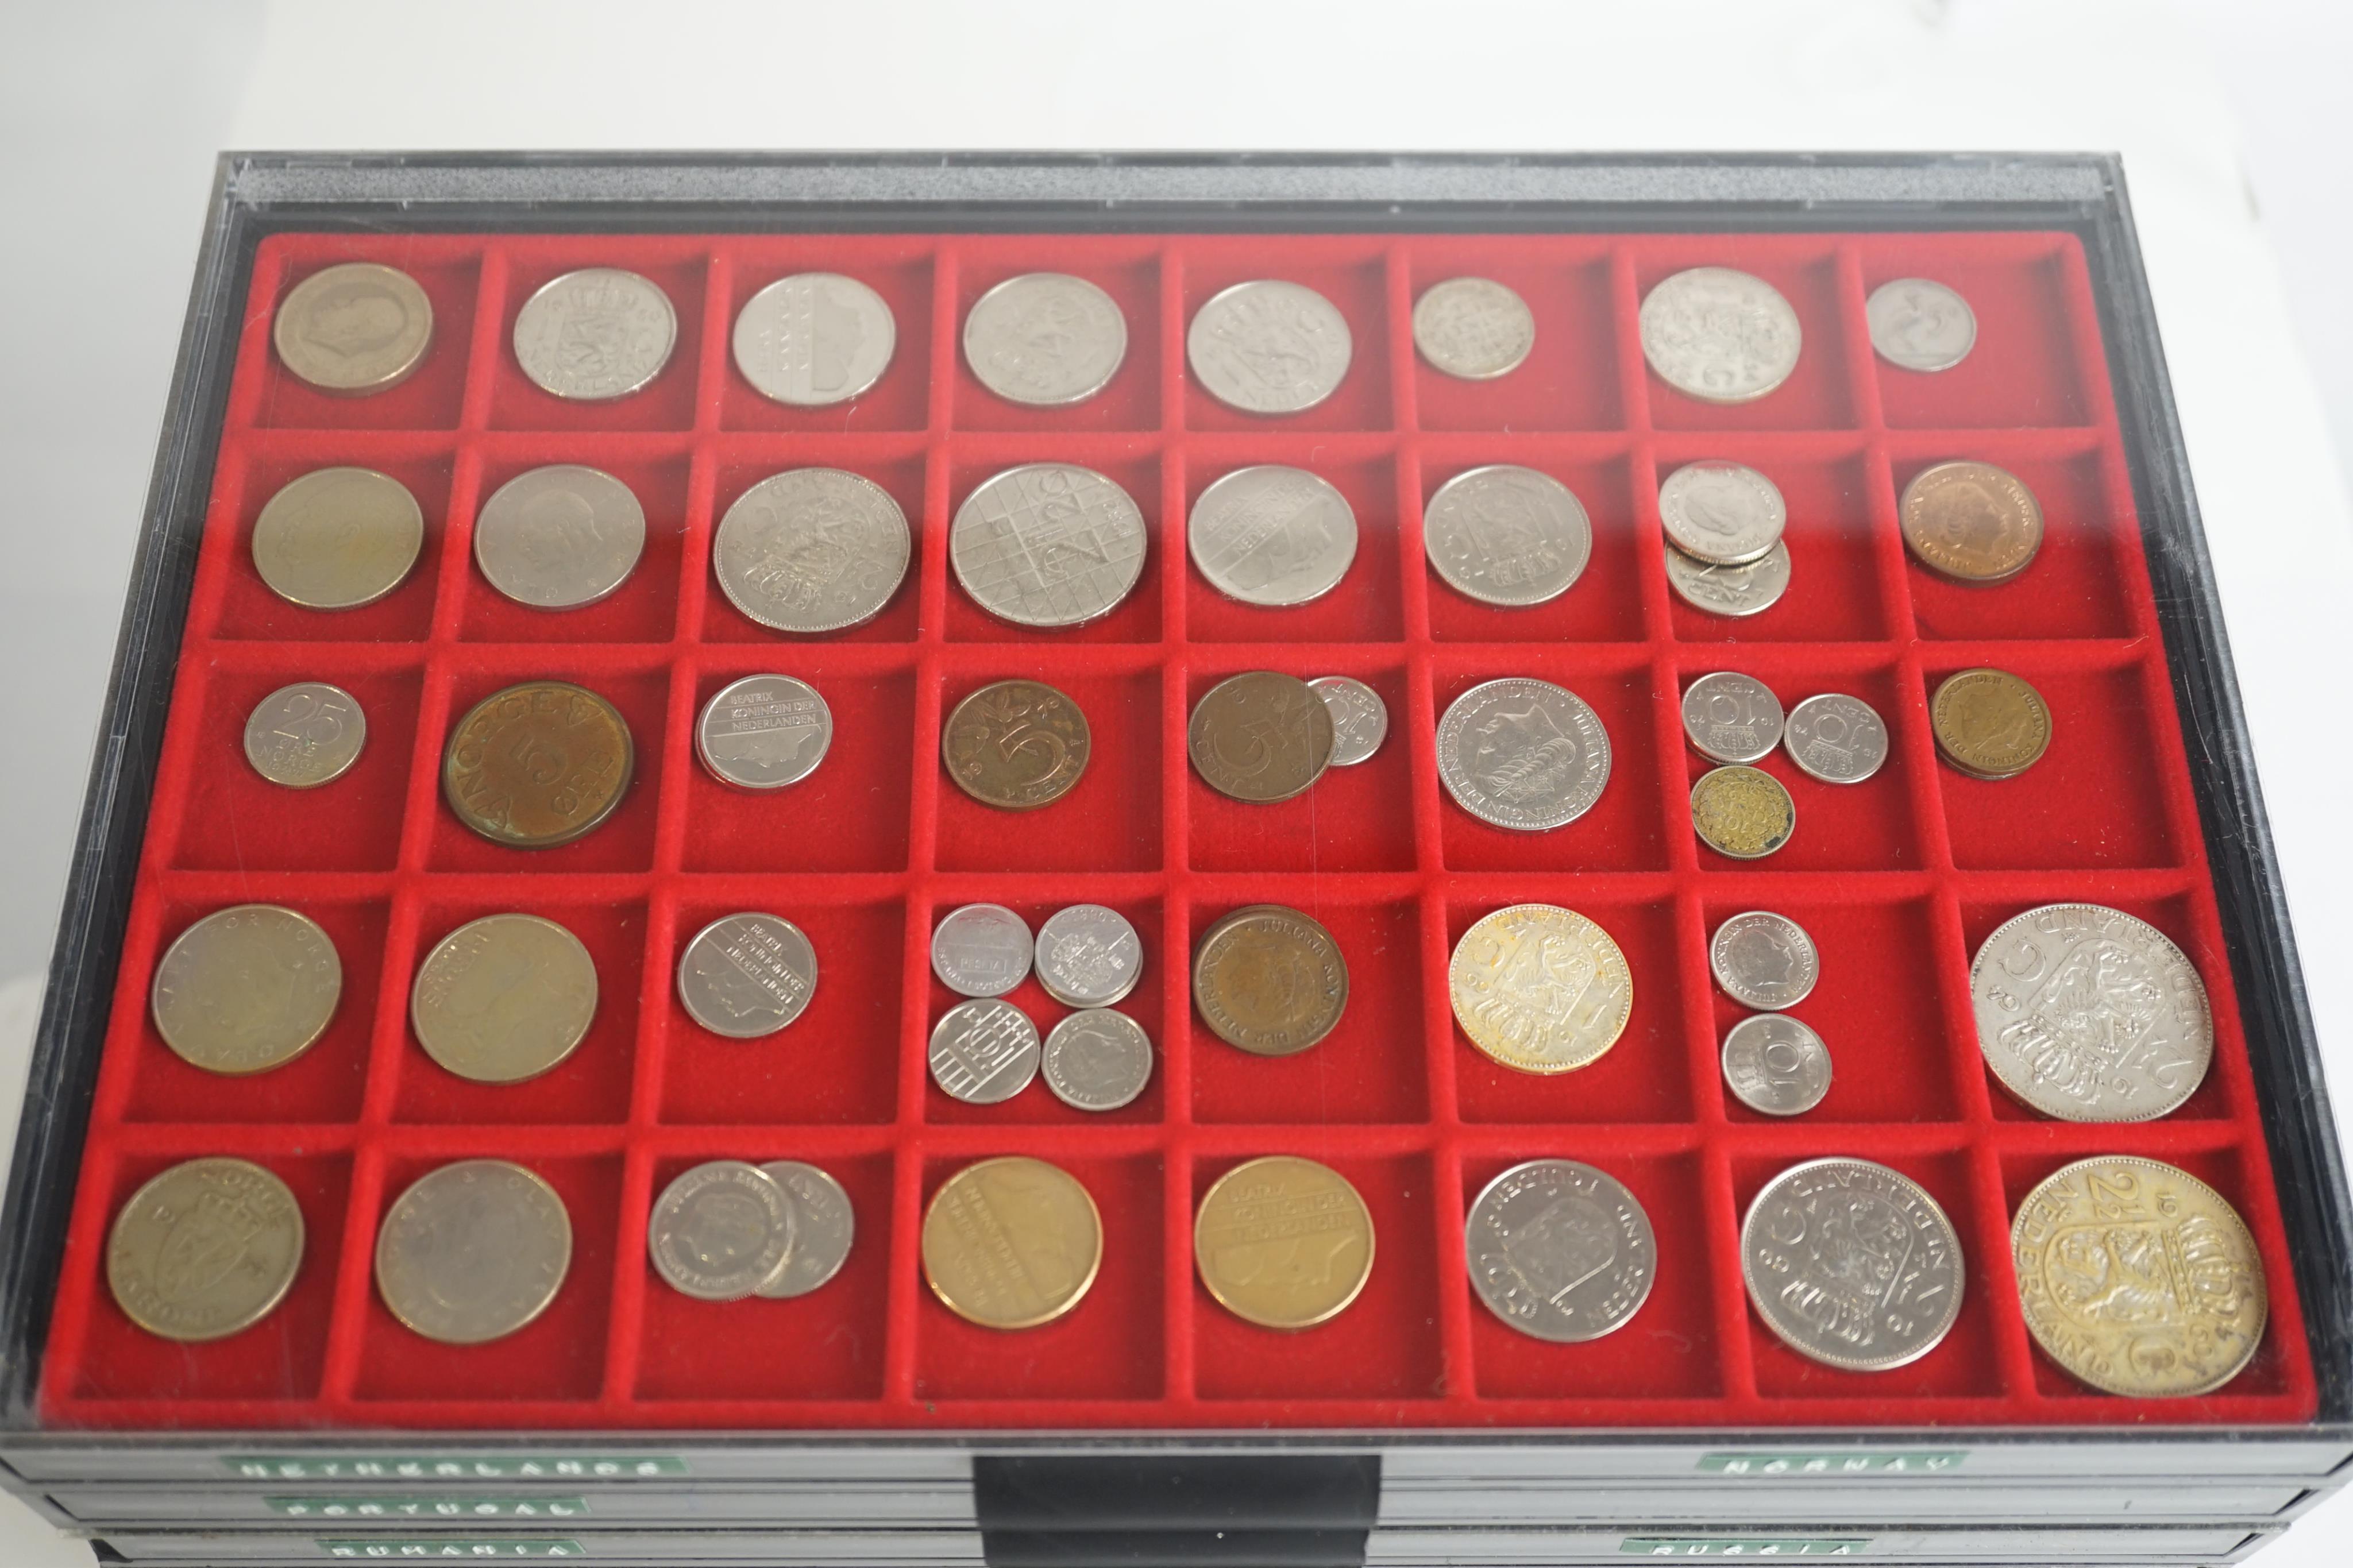 World coins, a collection, mostly 1960s to 1990s, including Hong Kong, Jamaica, Cyprus, Panama, Japan, miscellaneous Arabic, Greece, Germany, Britain, Singapore, South Africa, Ireland, Italy, Spain, Portugal etc., in for